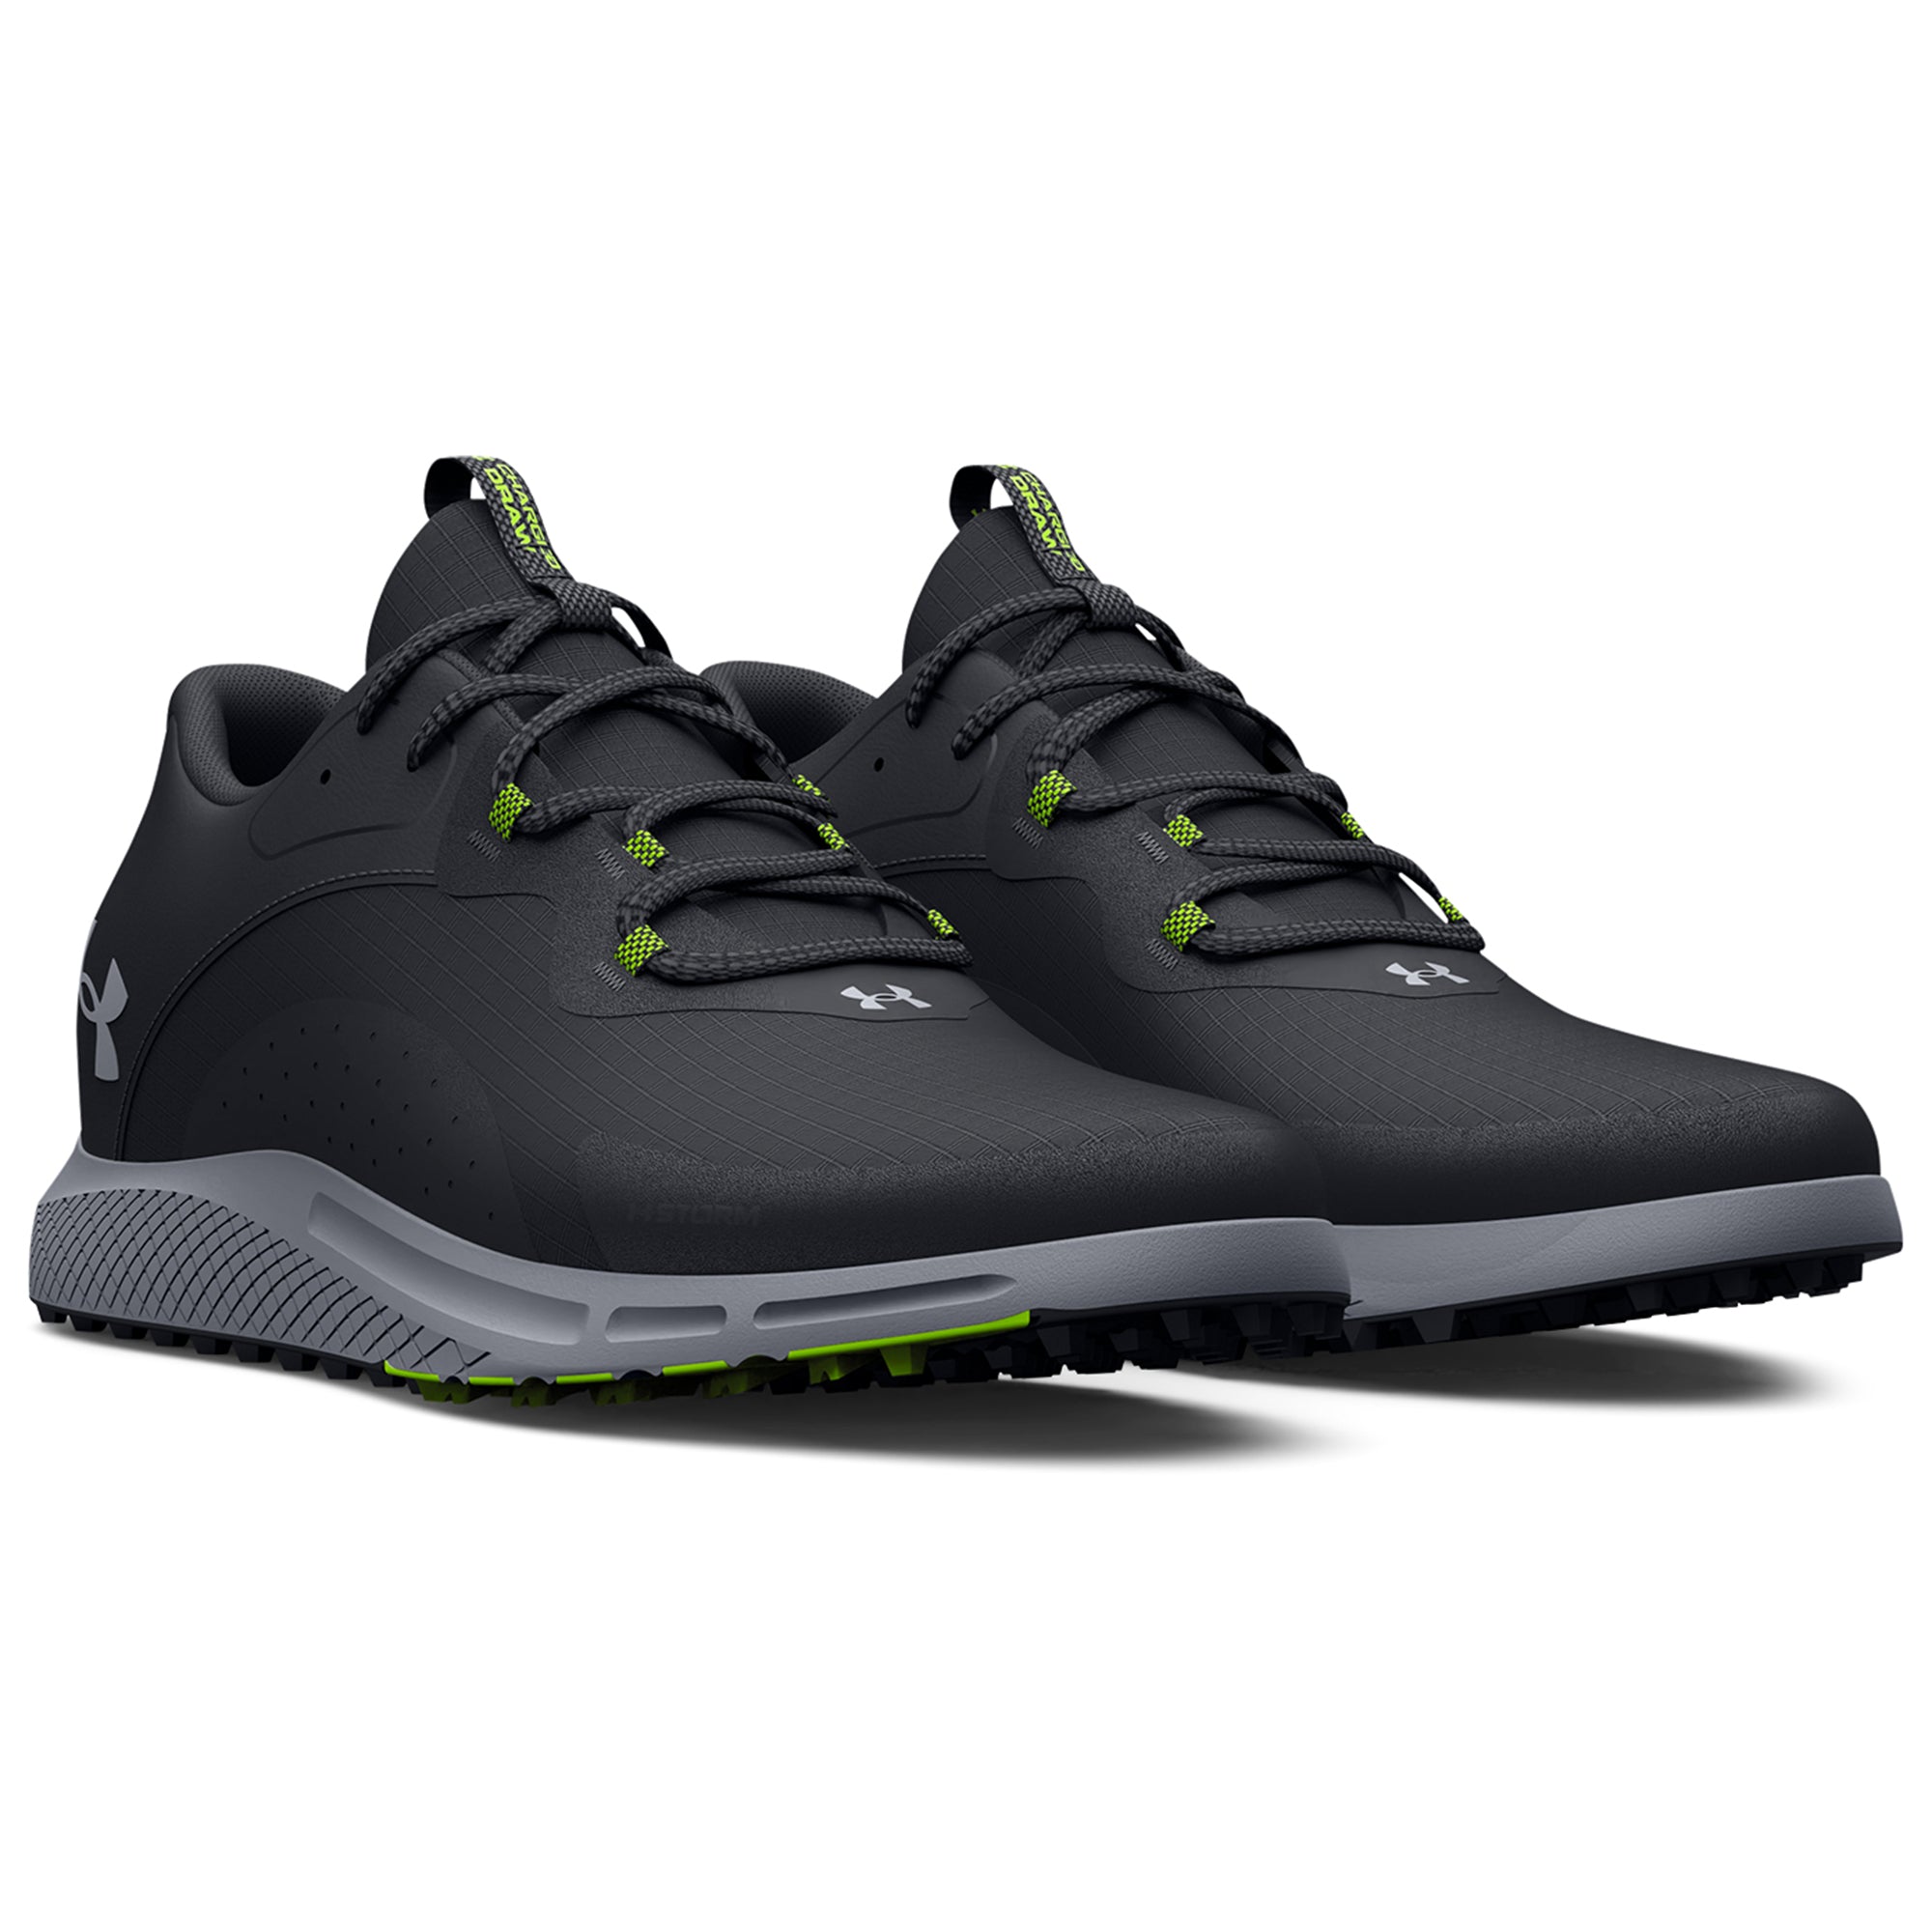 copy-of-under-armour-charged-draw-2-sl-golf-shoes-3026399-black-001